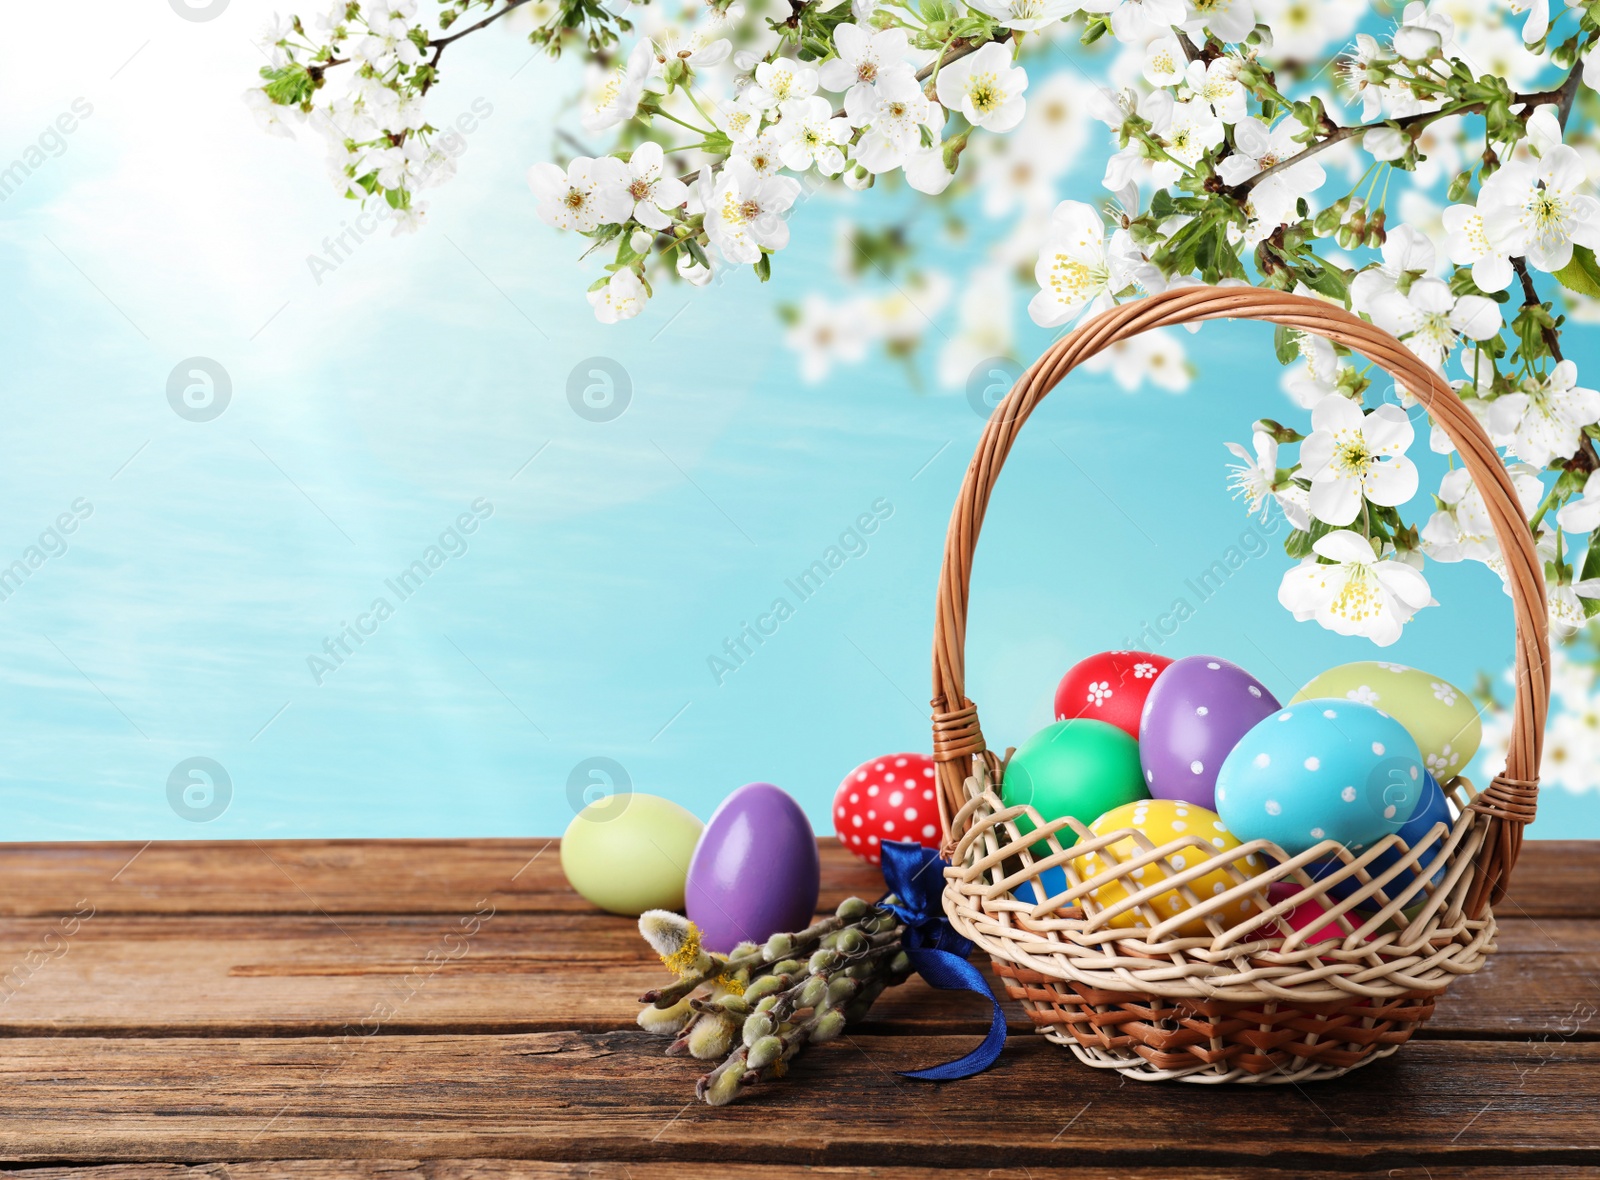 Image of Colorful Easter eggs in wicker basket and willow branches on wooden table outdoors, space for text